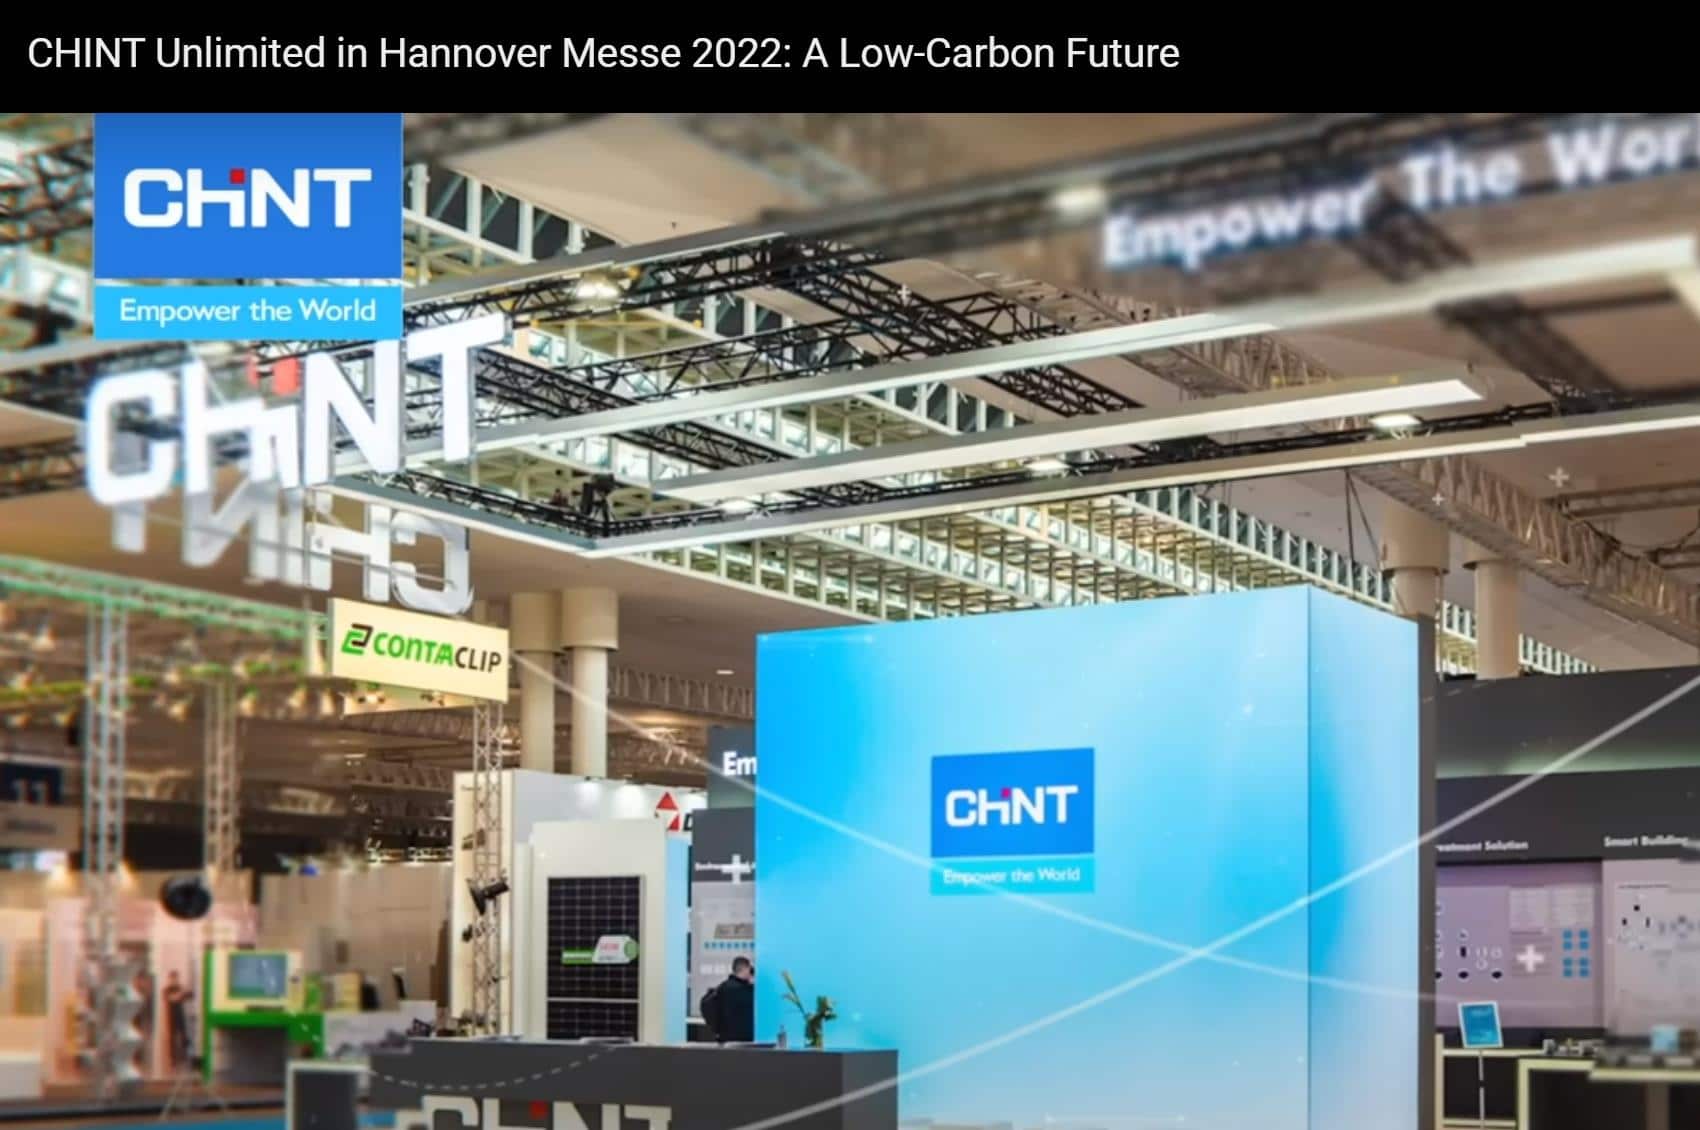 CHINT Unlimited in Hannover Messe 2022